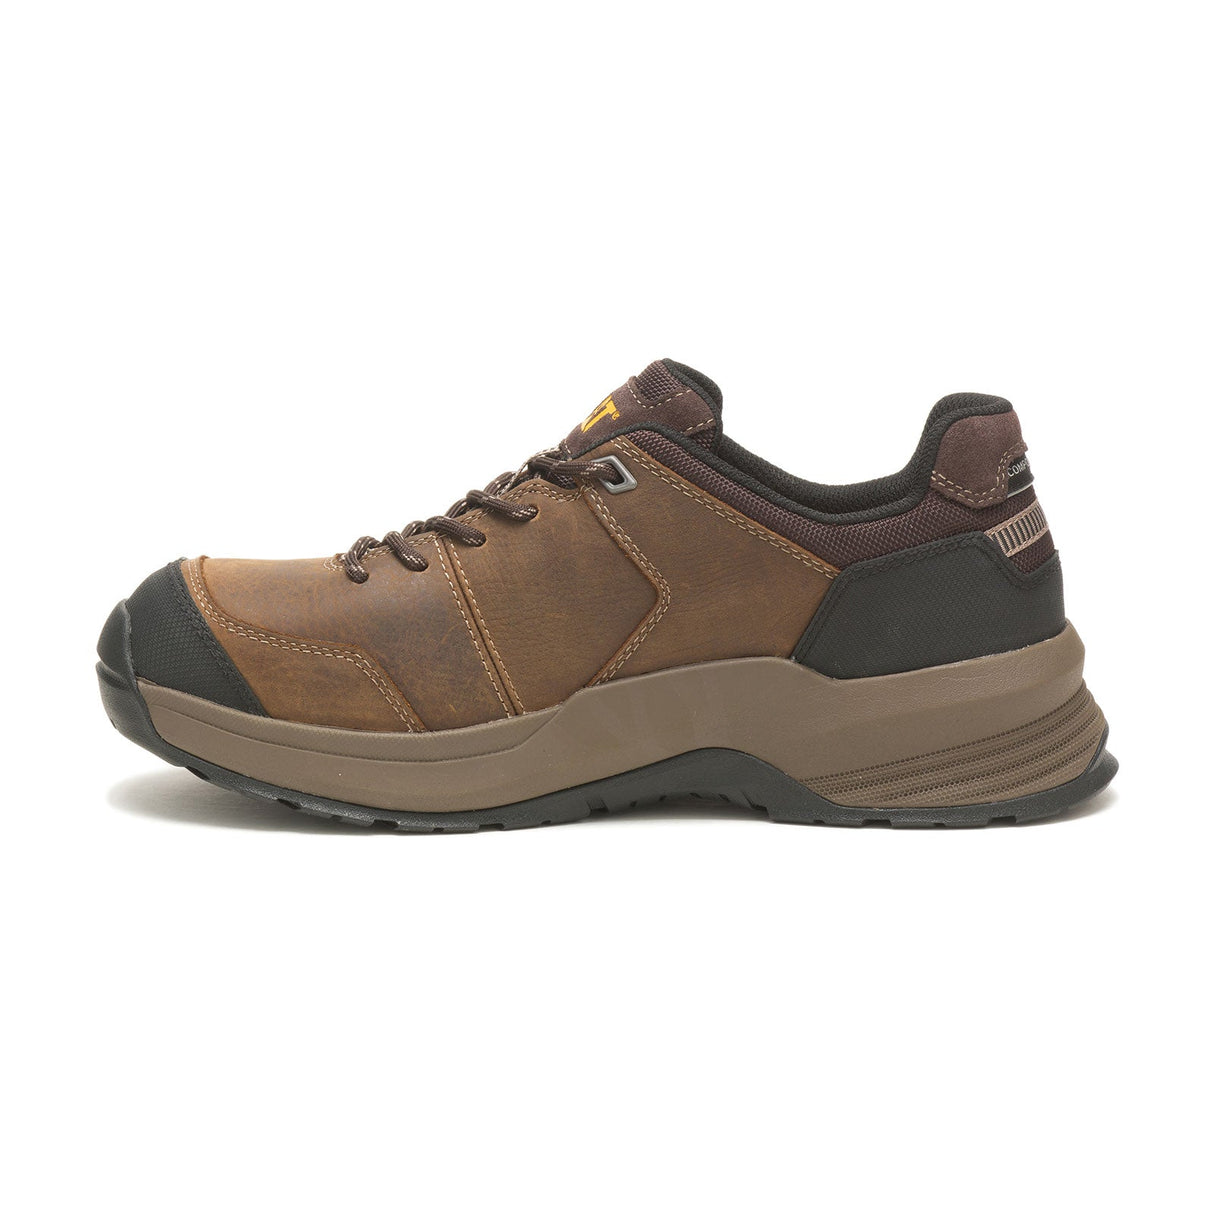 Caterpillar Streamline 2 Le At Her Men's Composite-Toe Work Shoes P91350-2